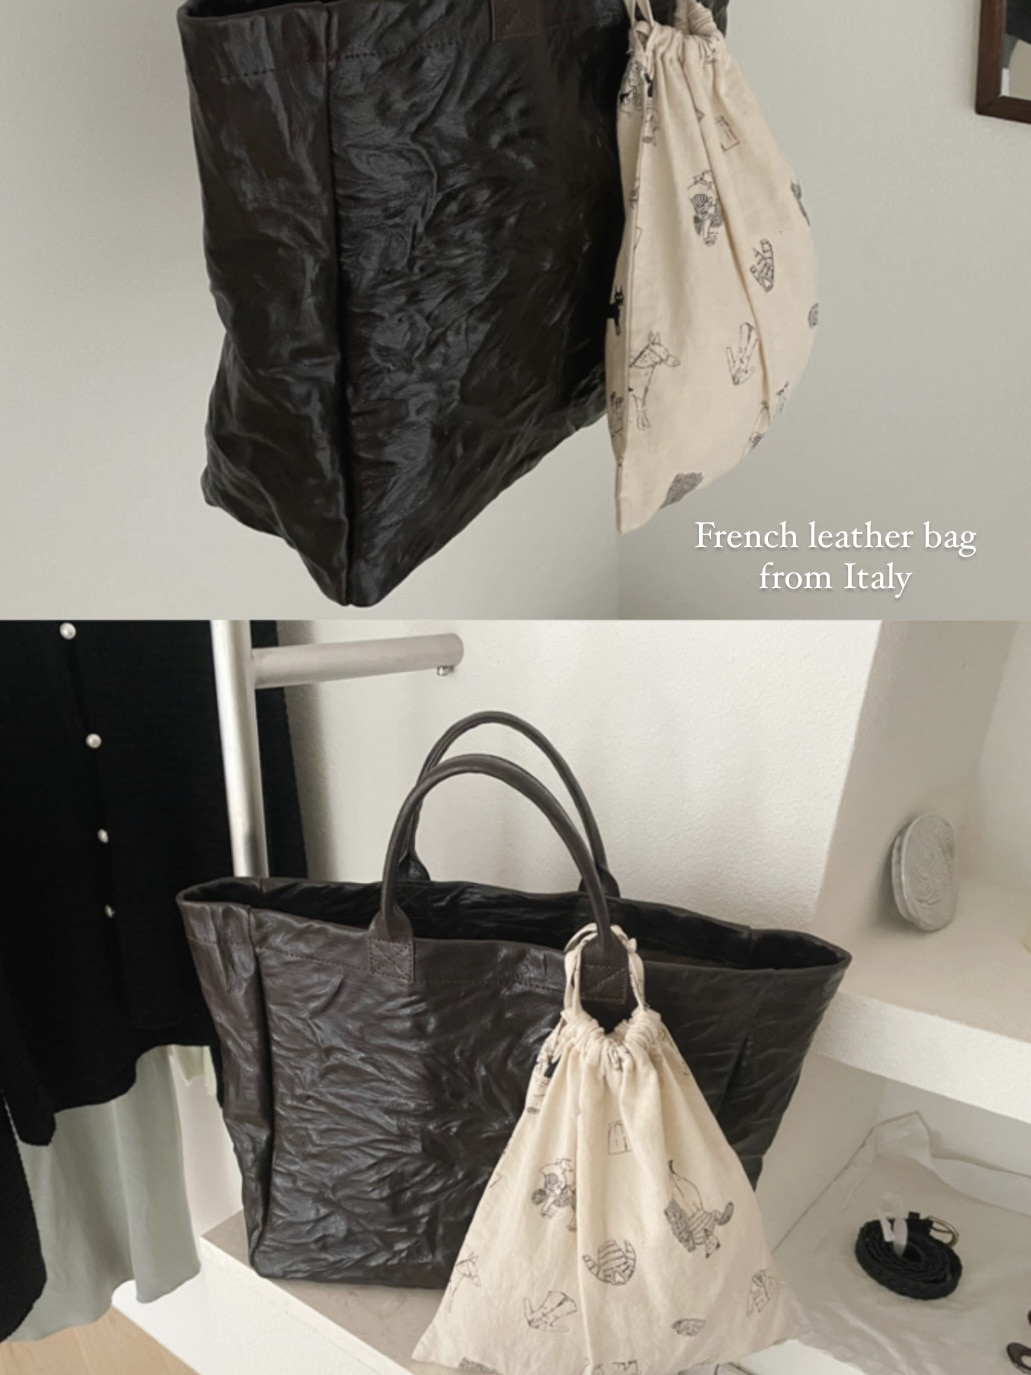 French leather bag from Italy